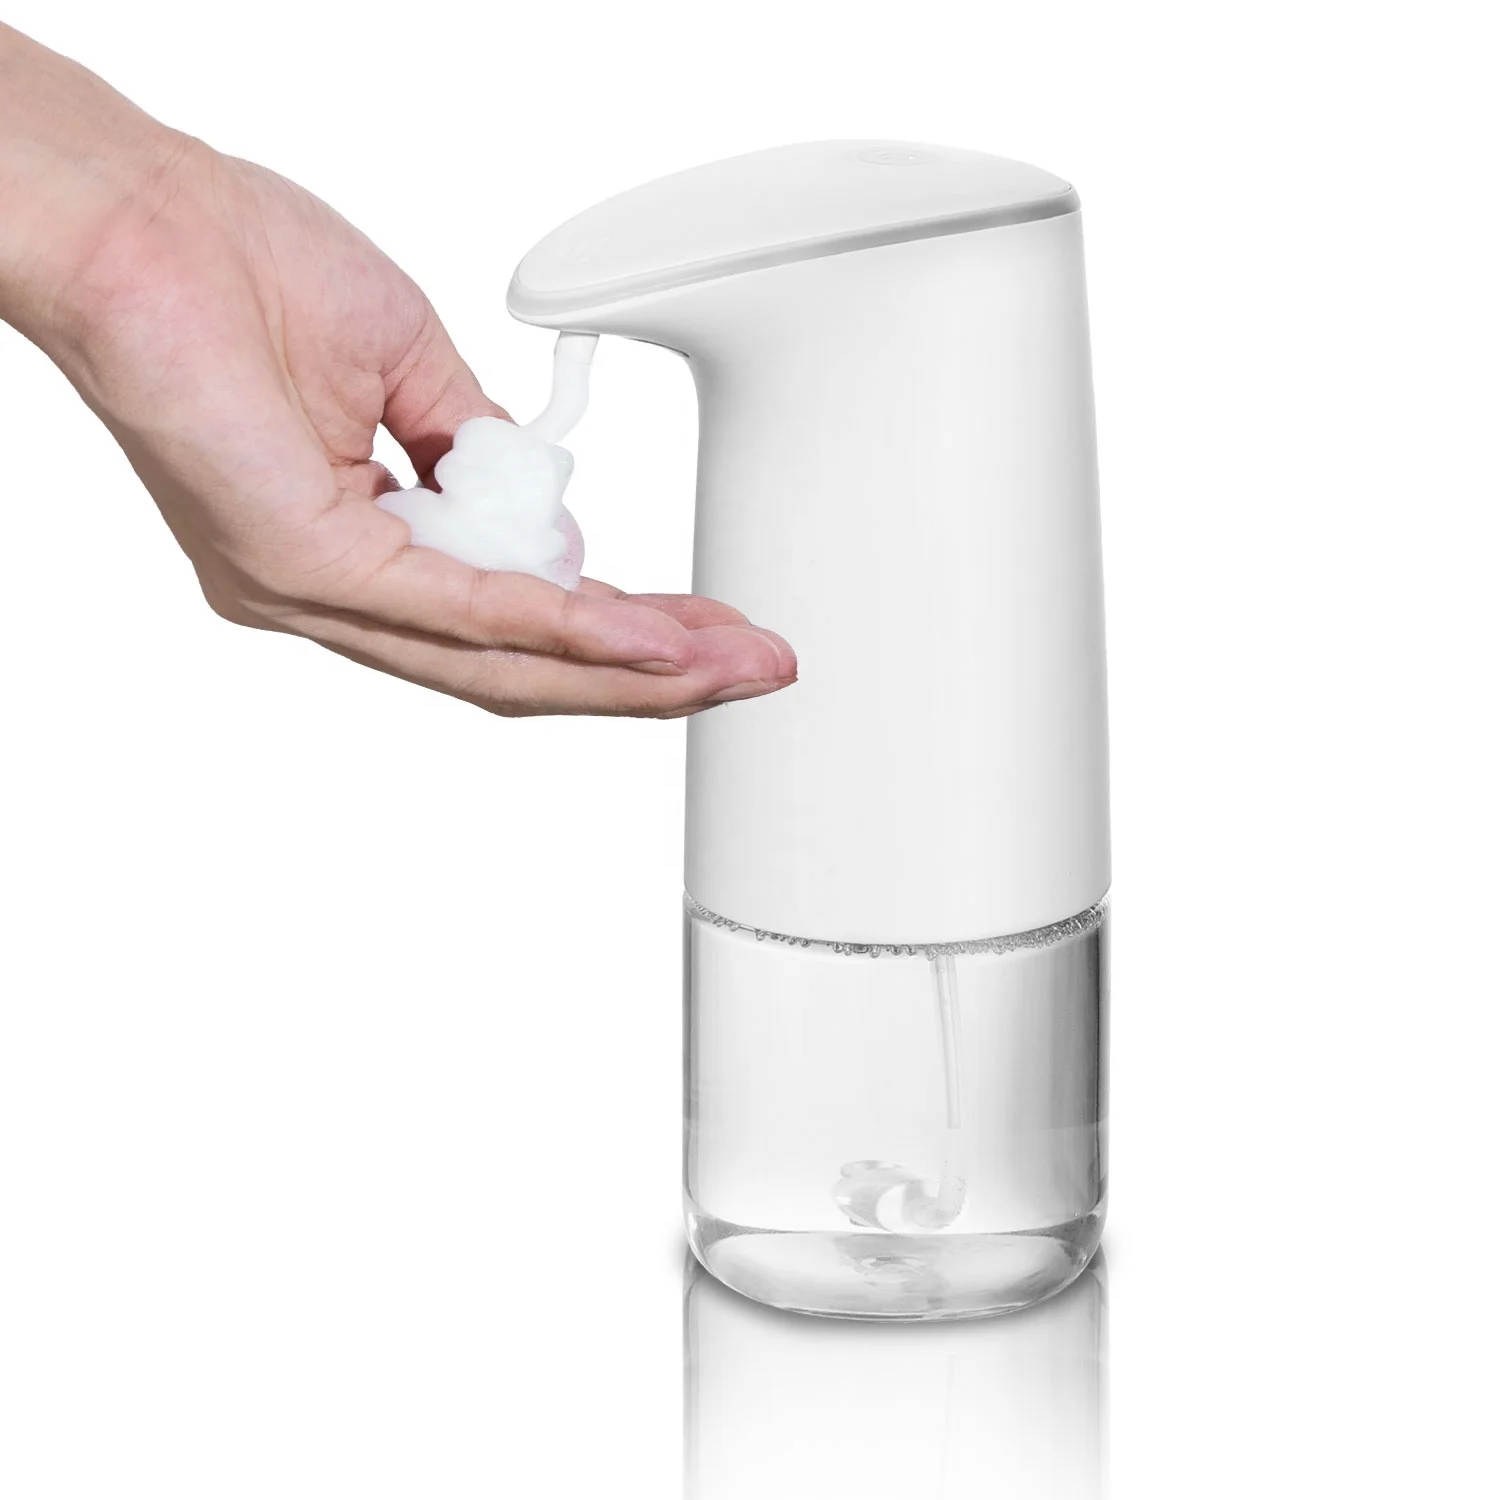 Popular Commercial Touchless Automatic Hand Soap Dispenser For Office - Buy  Hand Soap Dispenser,Touchless Soap Dispenser,Office Soap Dispenser Product  on 